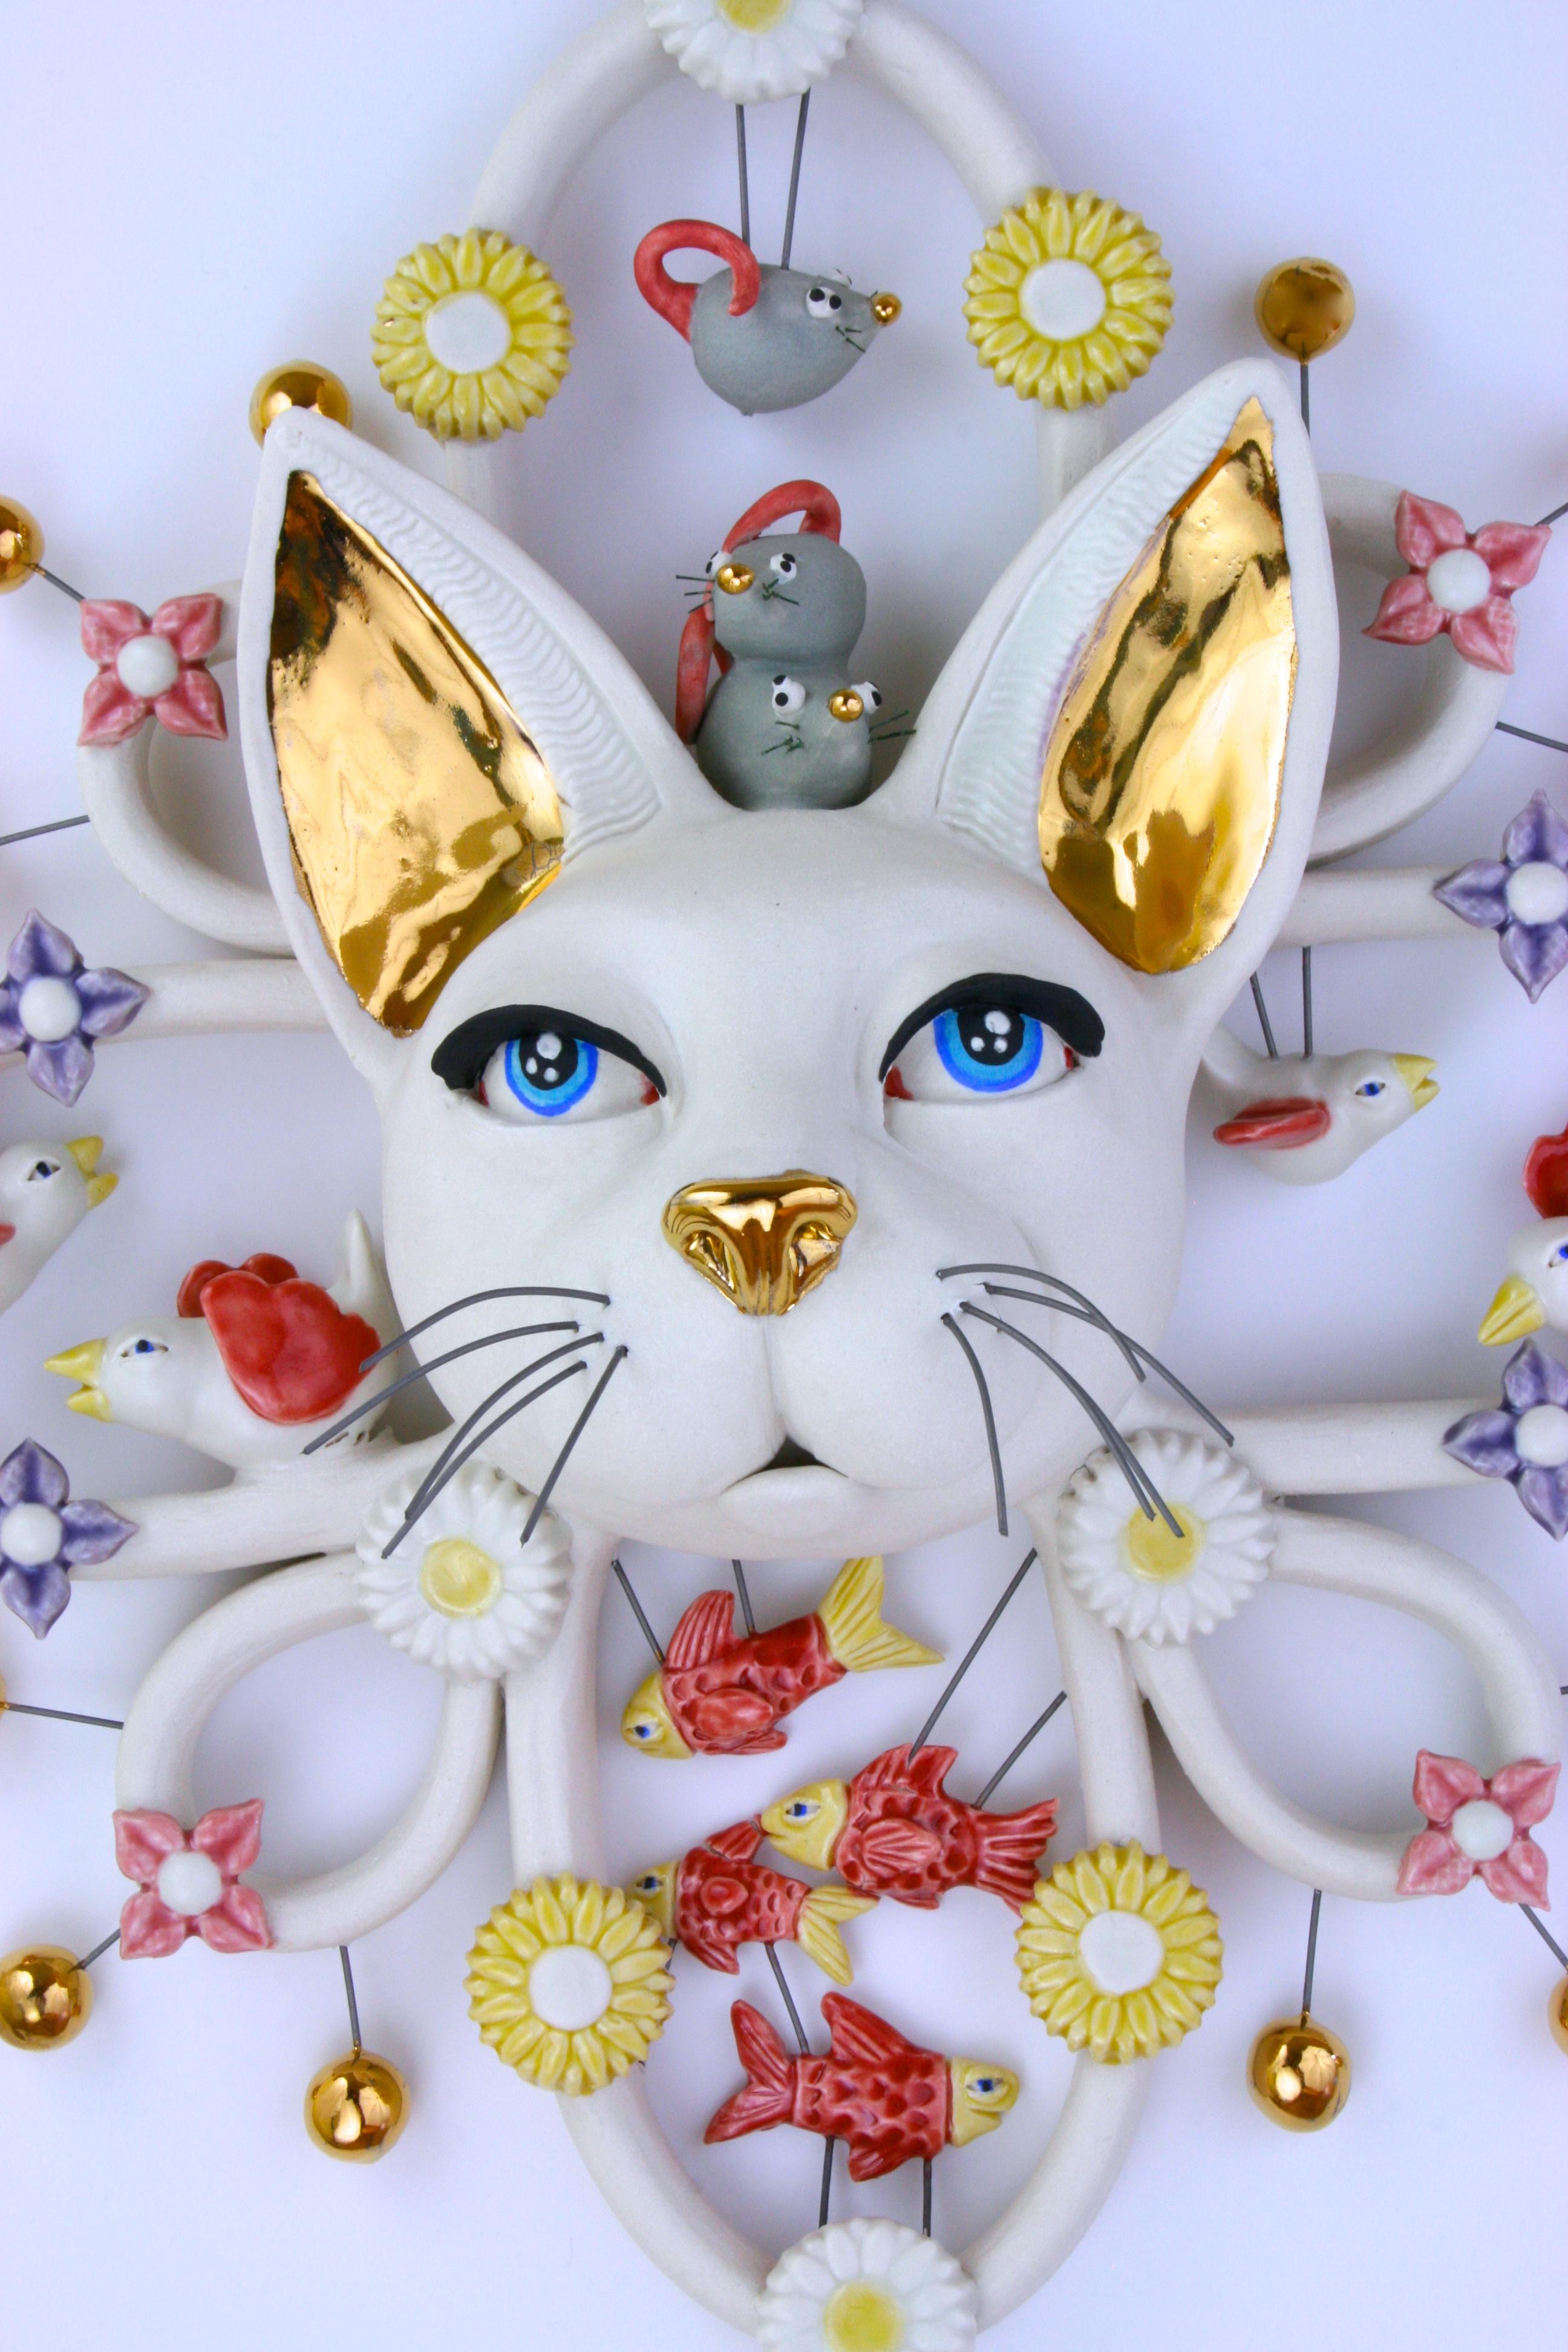 CAT ATTACK - porcelain ceramic sculpture with cat, birds, mice, fish and flowers - Sculpture by Taylor Robenalt